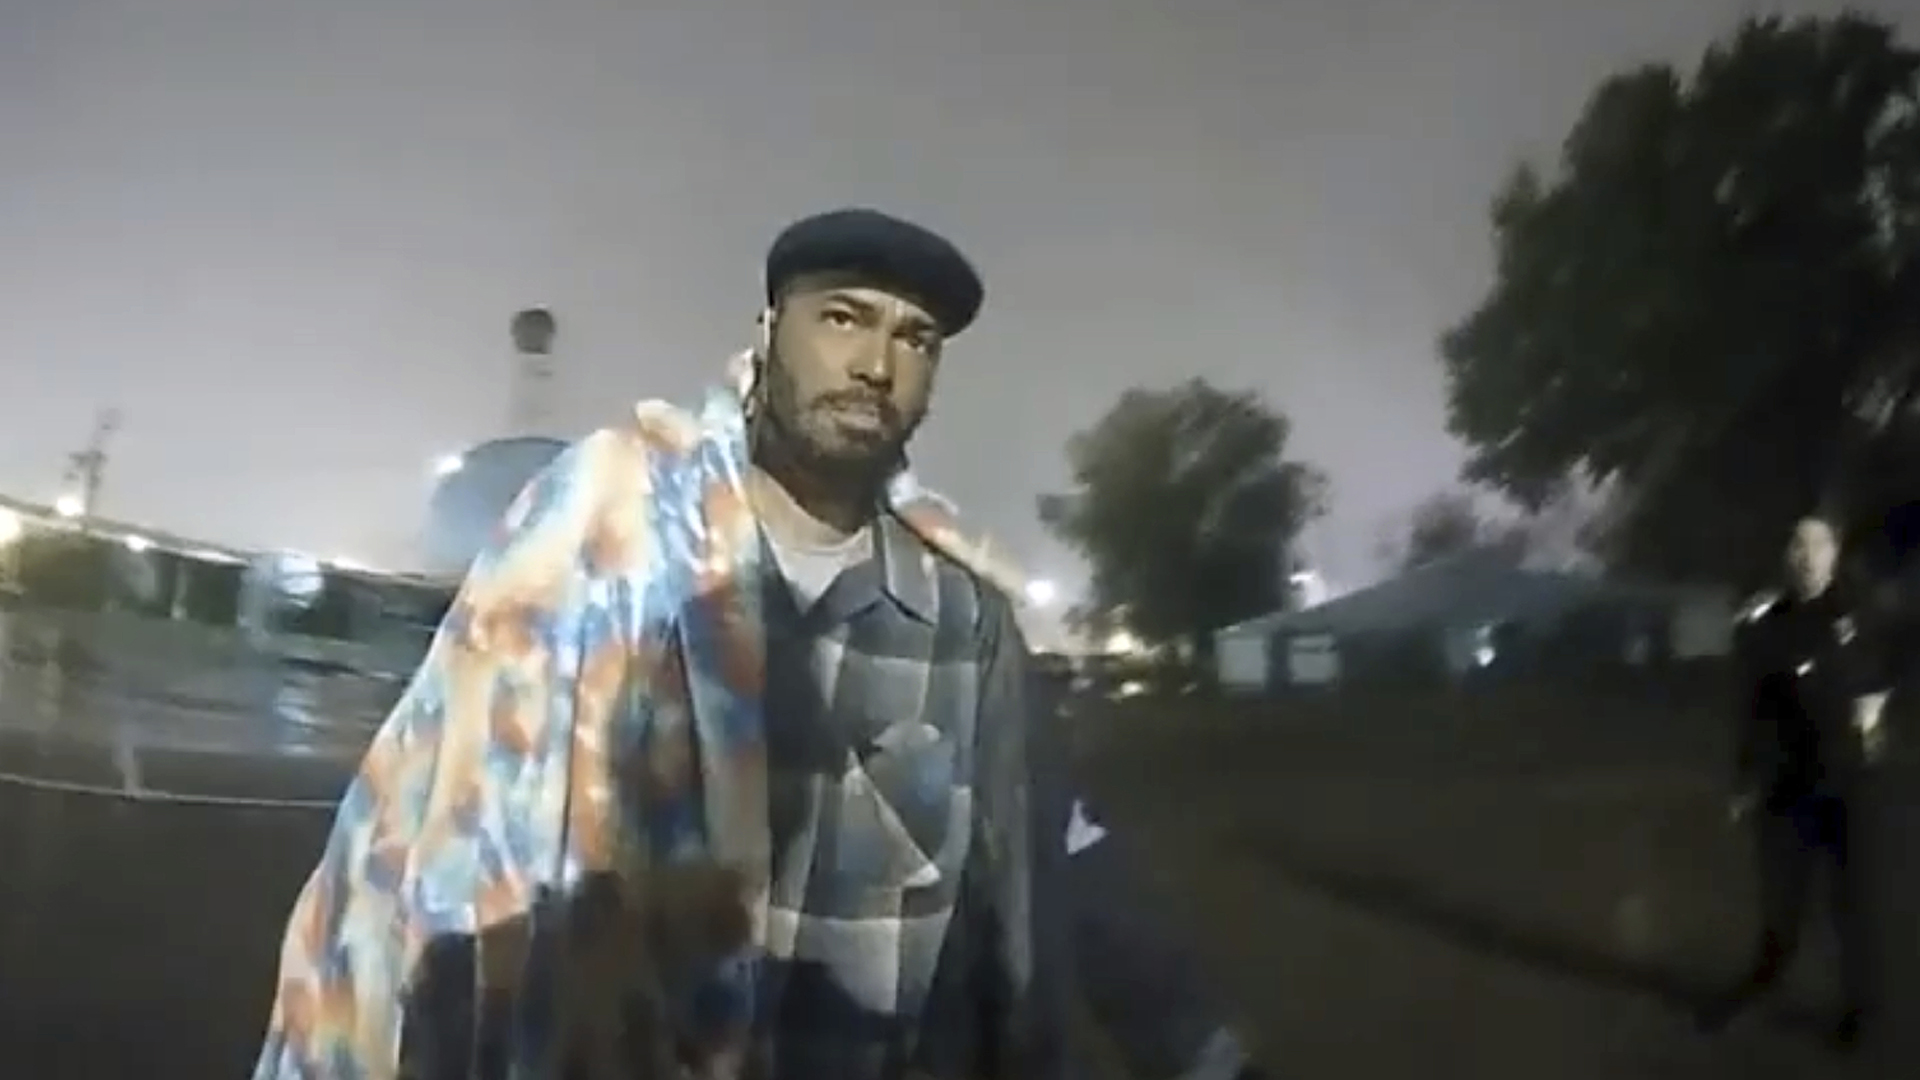 A still image from a video shows Demetrio Jackson standing in a parking lot, with an out-of-focus police officer, trees and buildings in the background under a night sky.